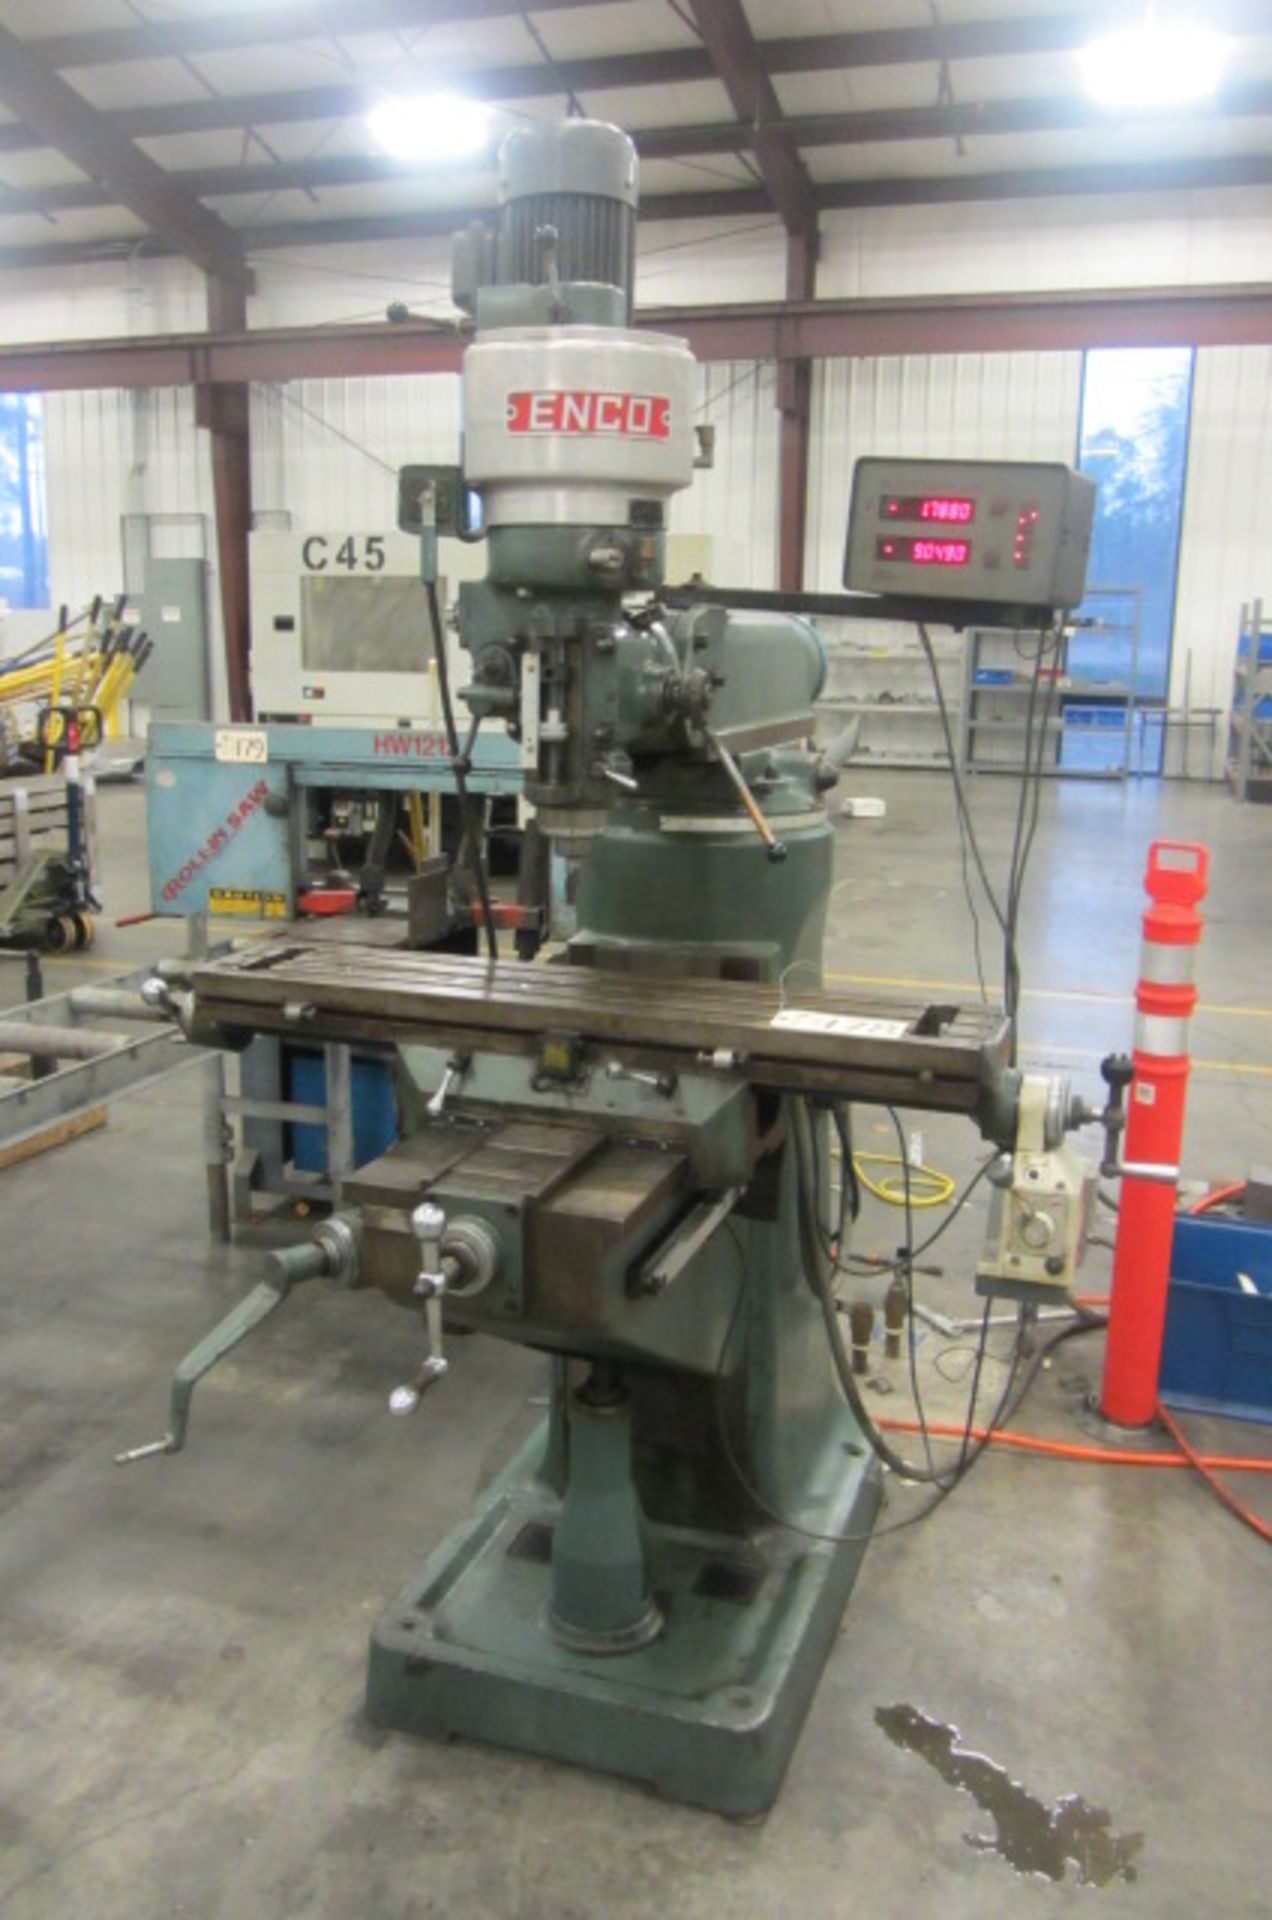 Enco Vertical Milling Machine with 9'' x 42'' Power Feed Table, R8 Spindle Speeds to 4800 RPM, 2-